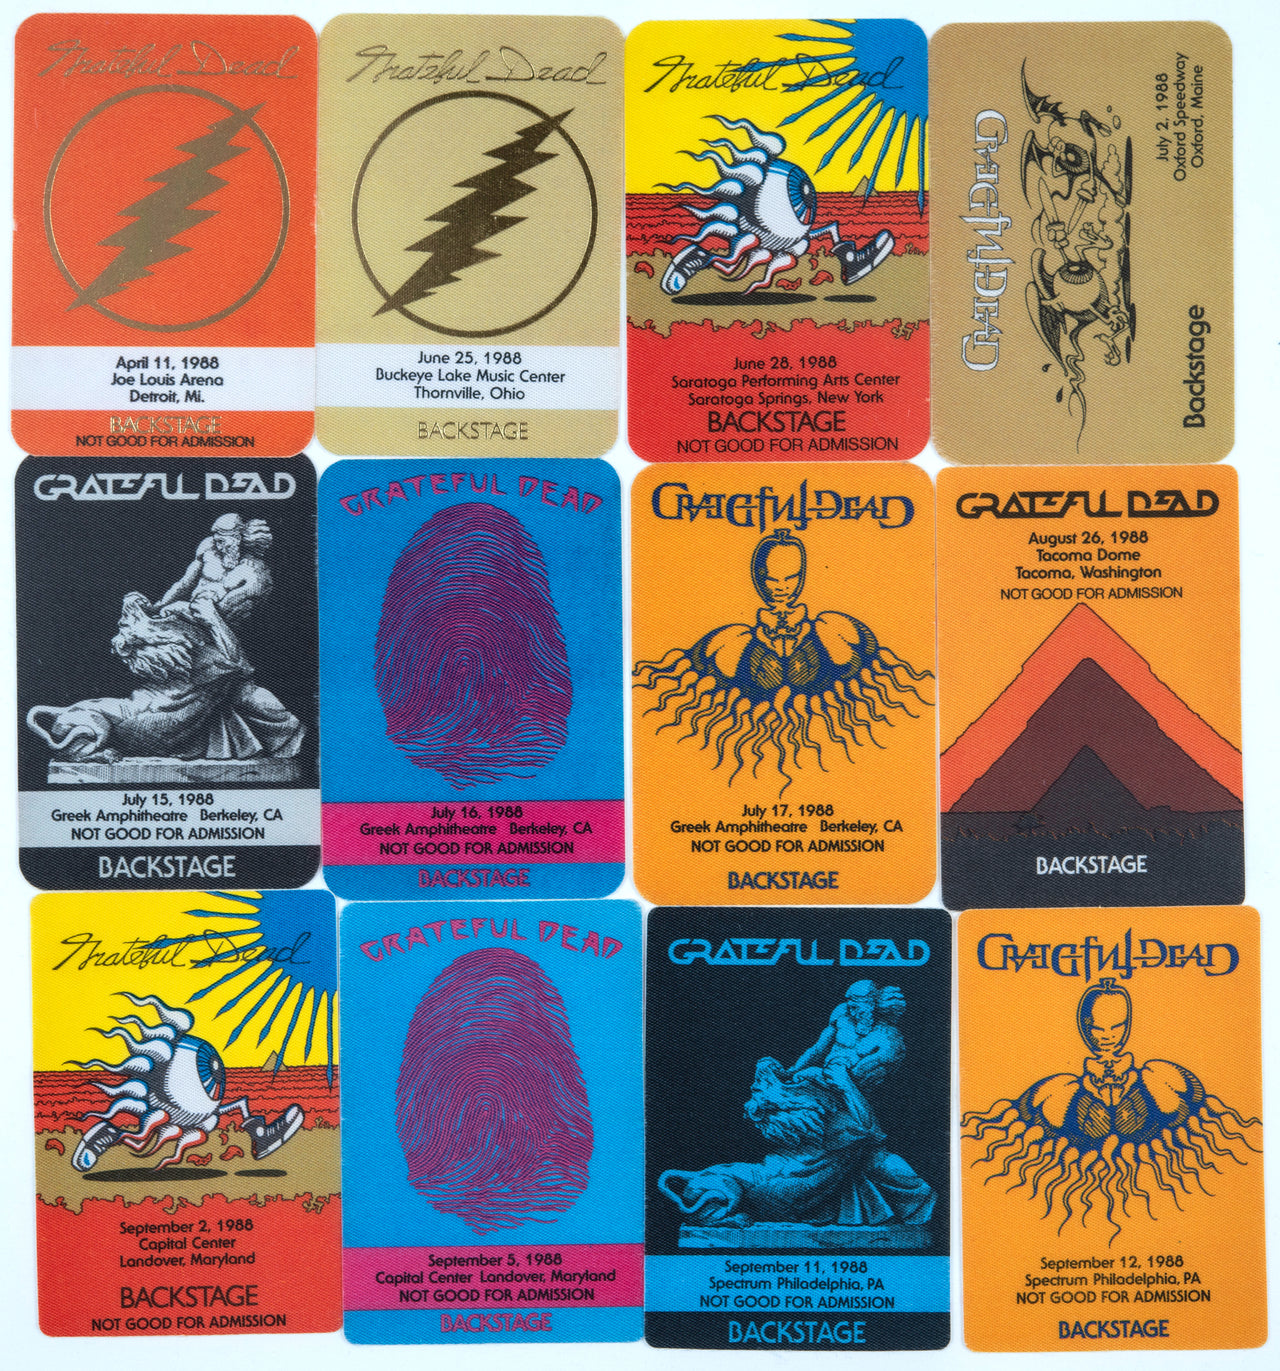 Grateful Dead Backstage Passes (4/11/1988 - 9/12/1988) from Dan Healy